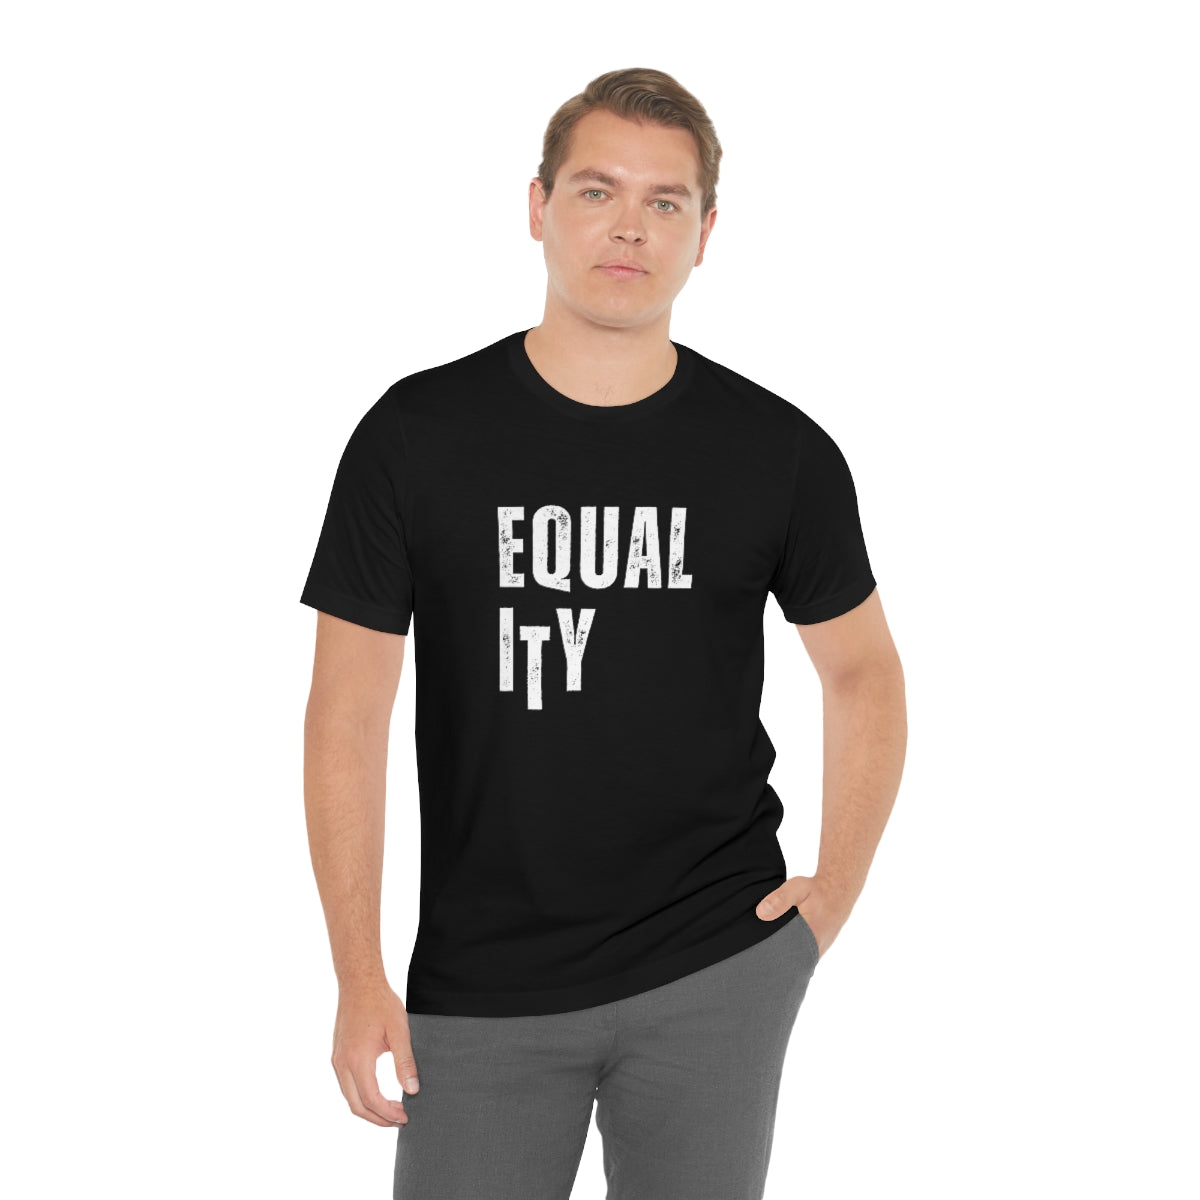 Equality T Shirt, Statement Tees, Equality Tees, Equality, Diversity, Equity, Inclusion Tops